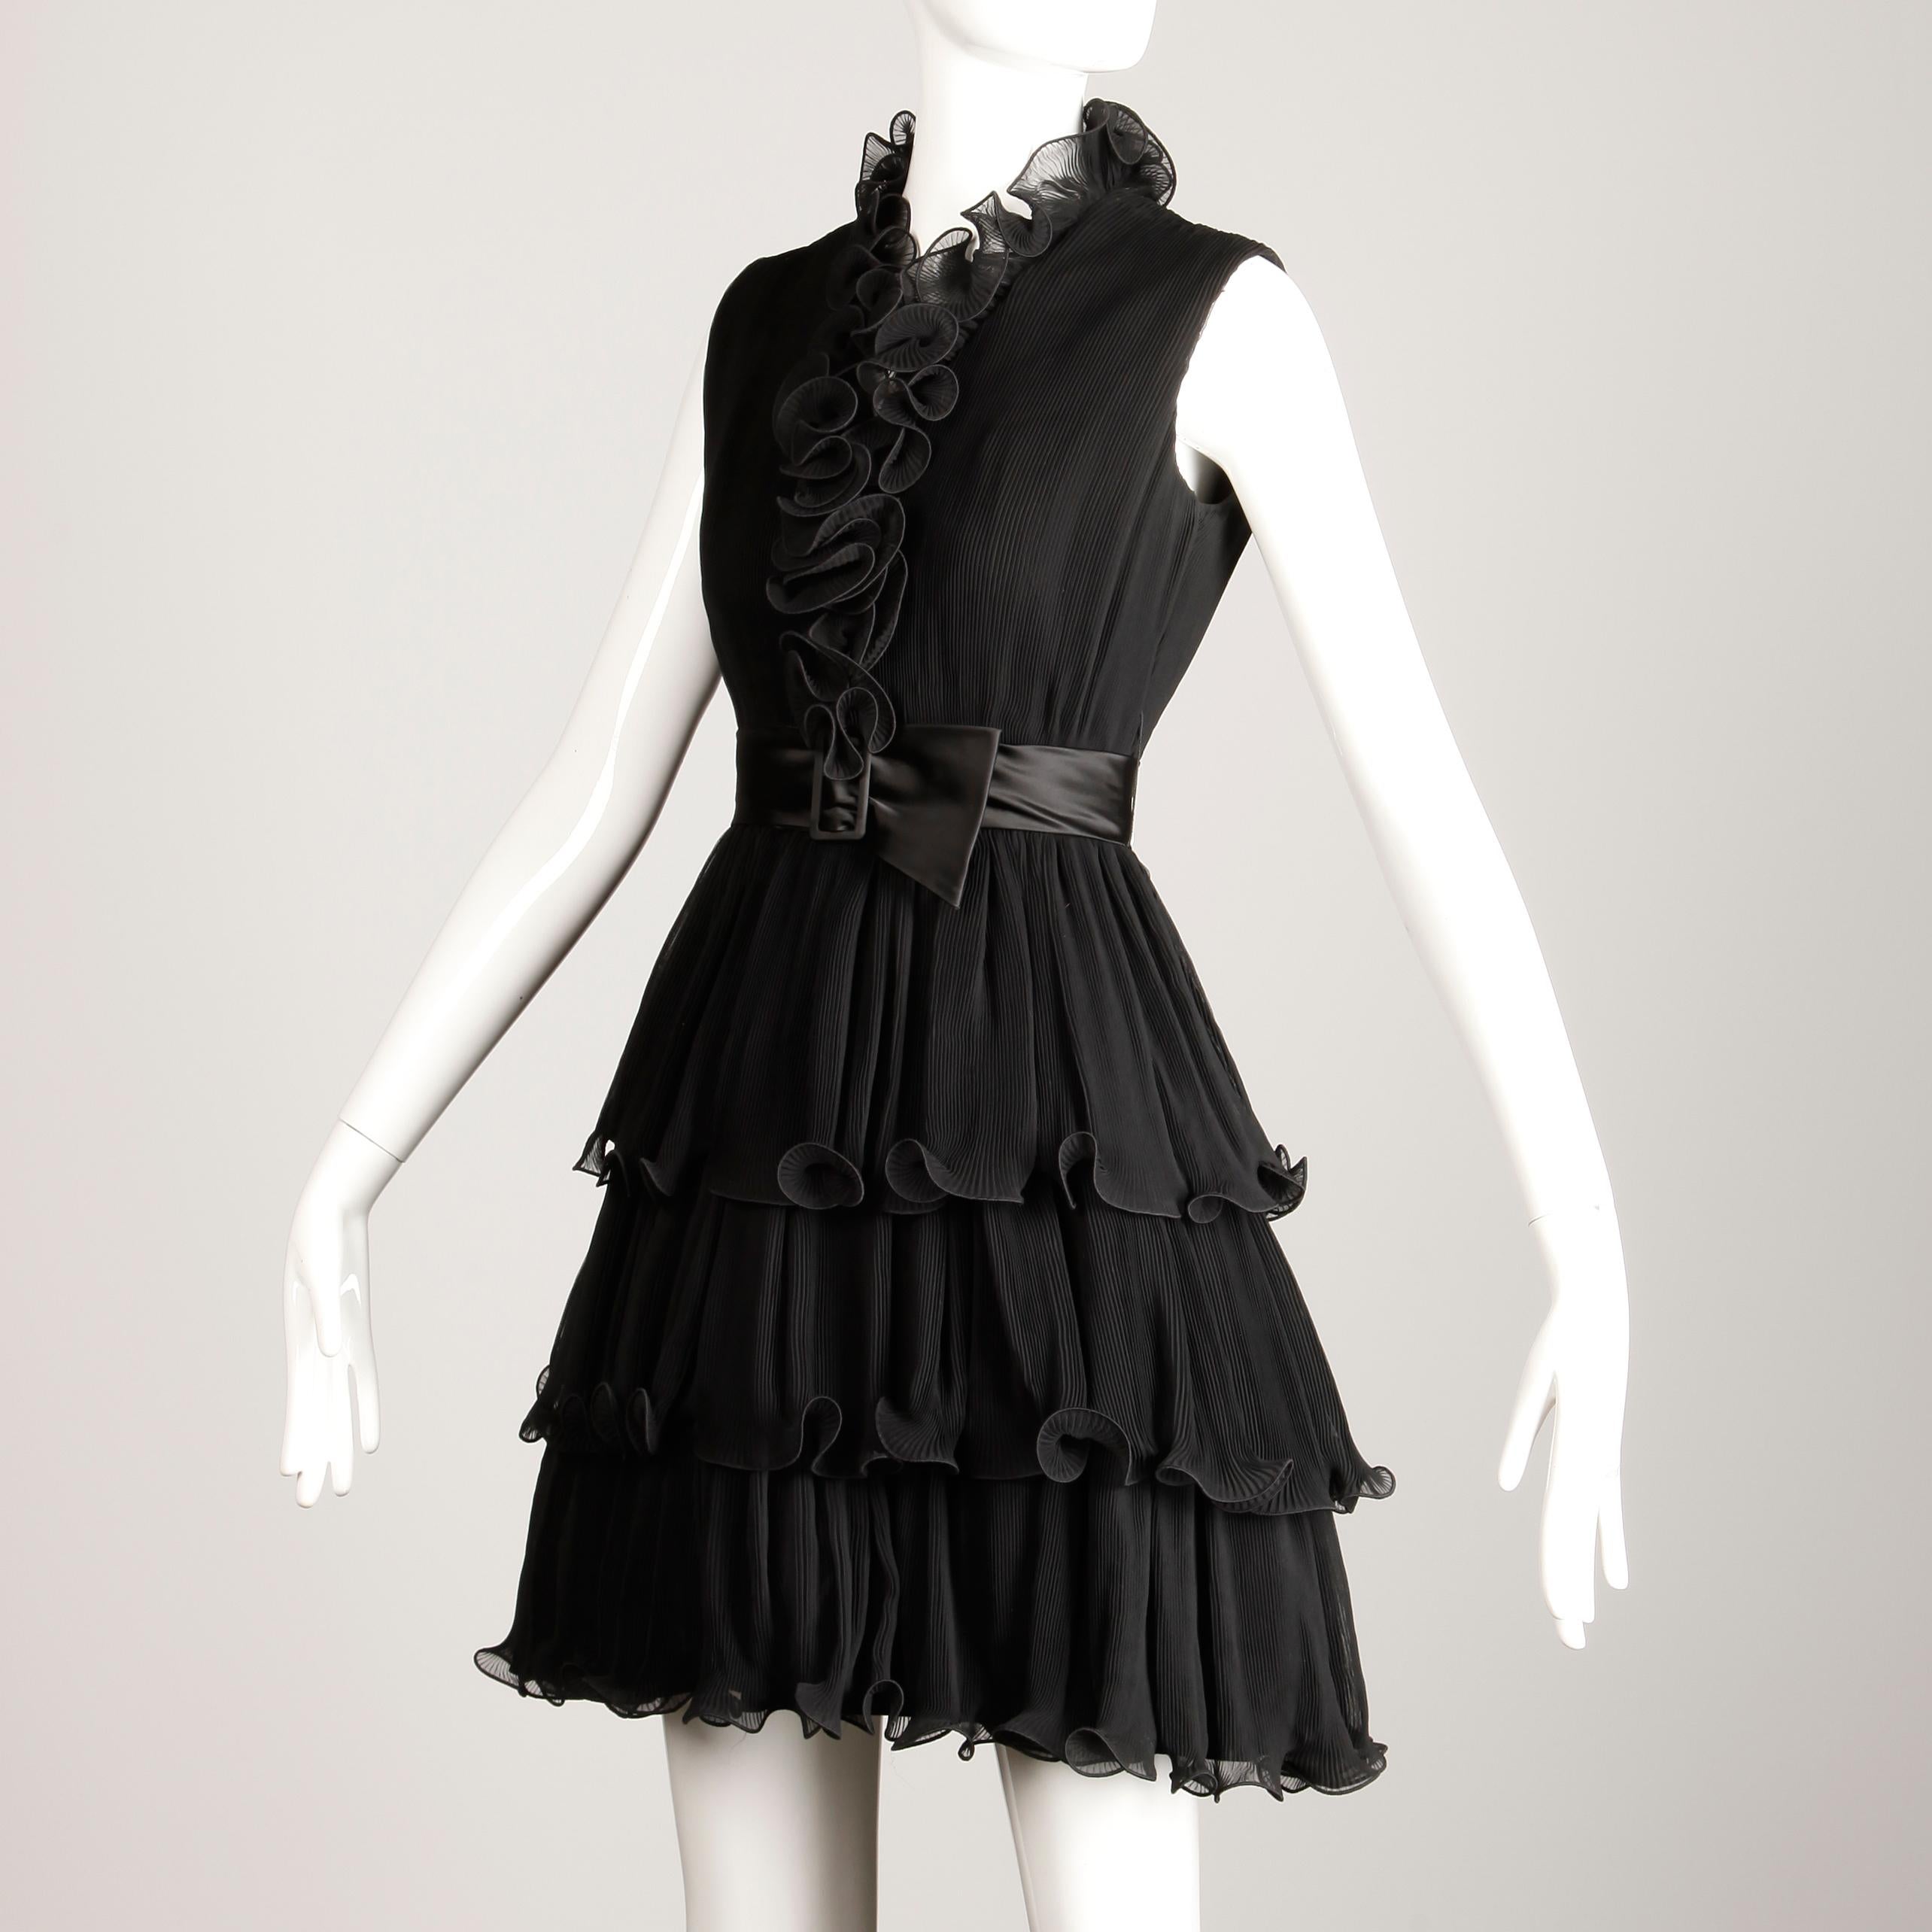 Darling vintage black Emma Domb cocktail dress with ruffled micro pleats from the 1970s. Fully lined with rear zip, snap, and hook closure and tie closure on the tulle lining. The marked size is 7, but the dress fits more like a modern XS. The bust